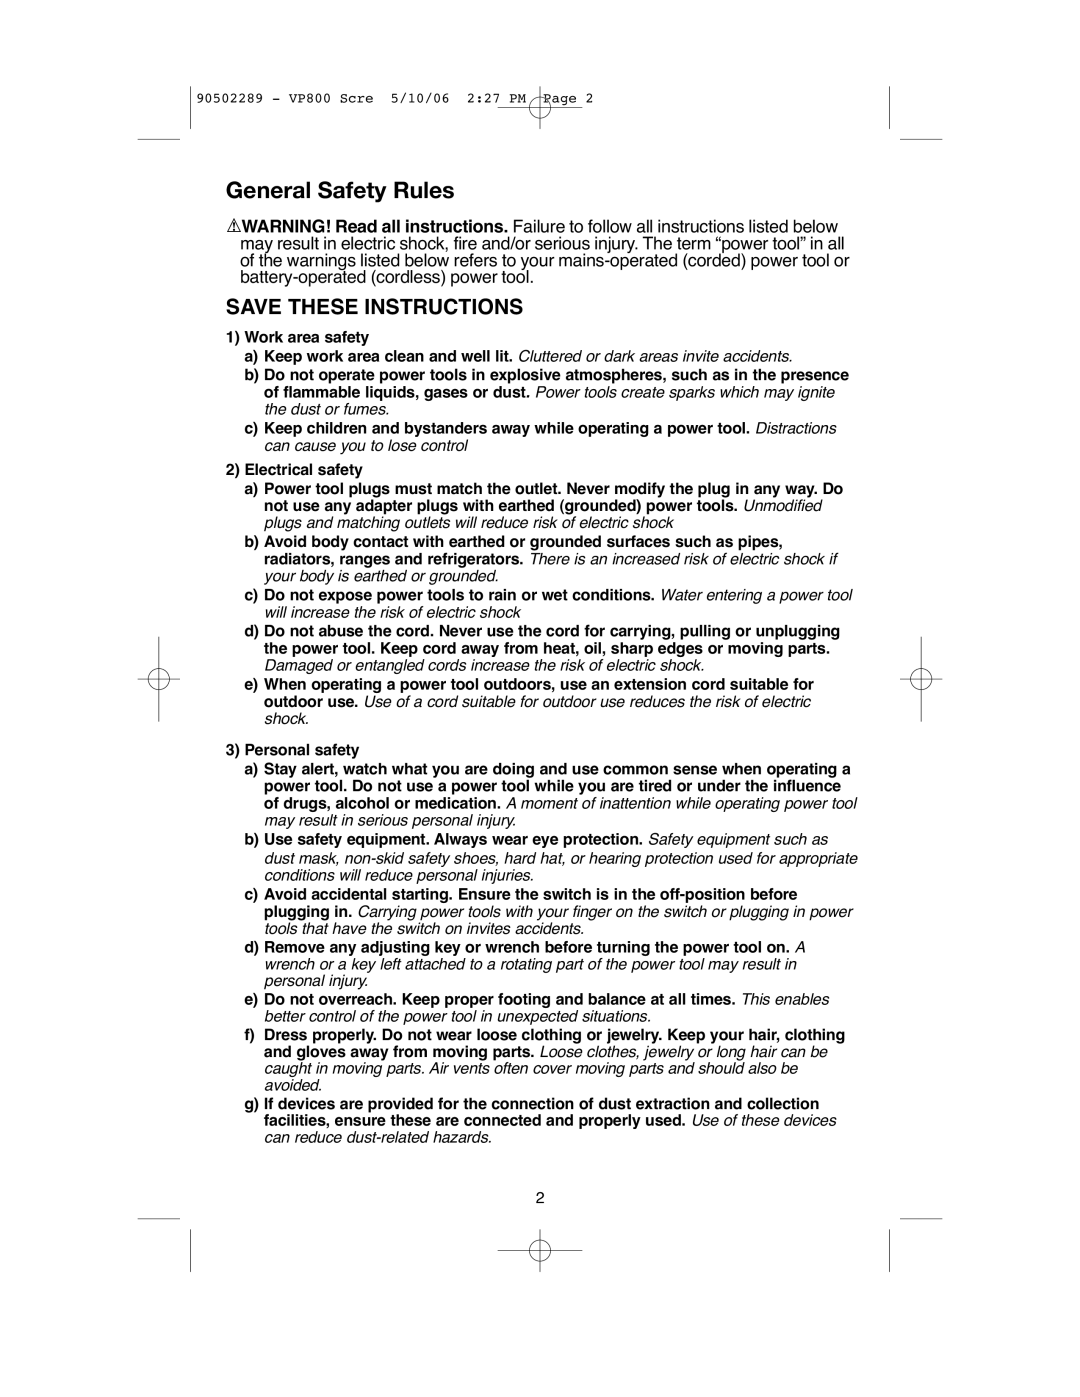 Black & Decker VP800 instruction manual General Safety Rules, Save These Instructions 